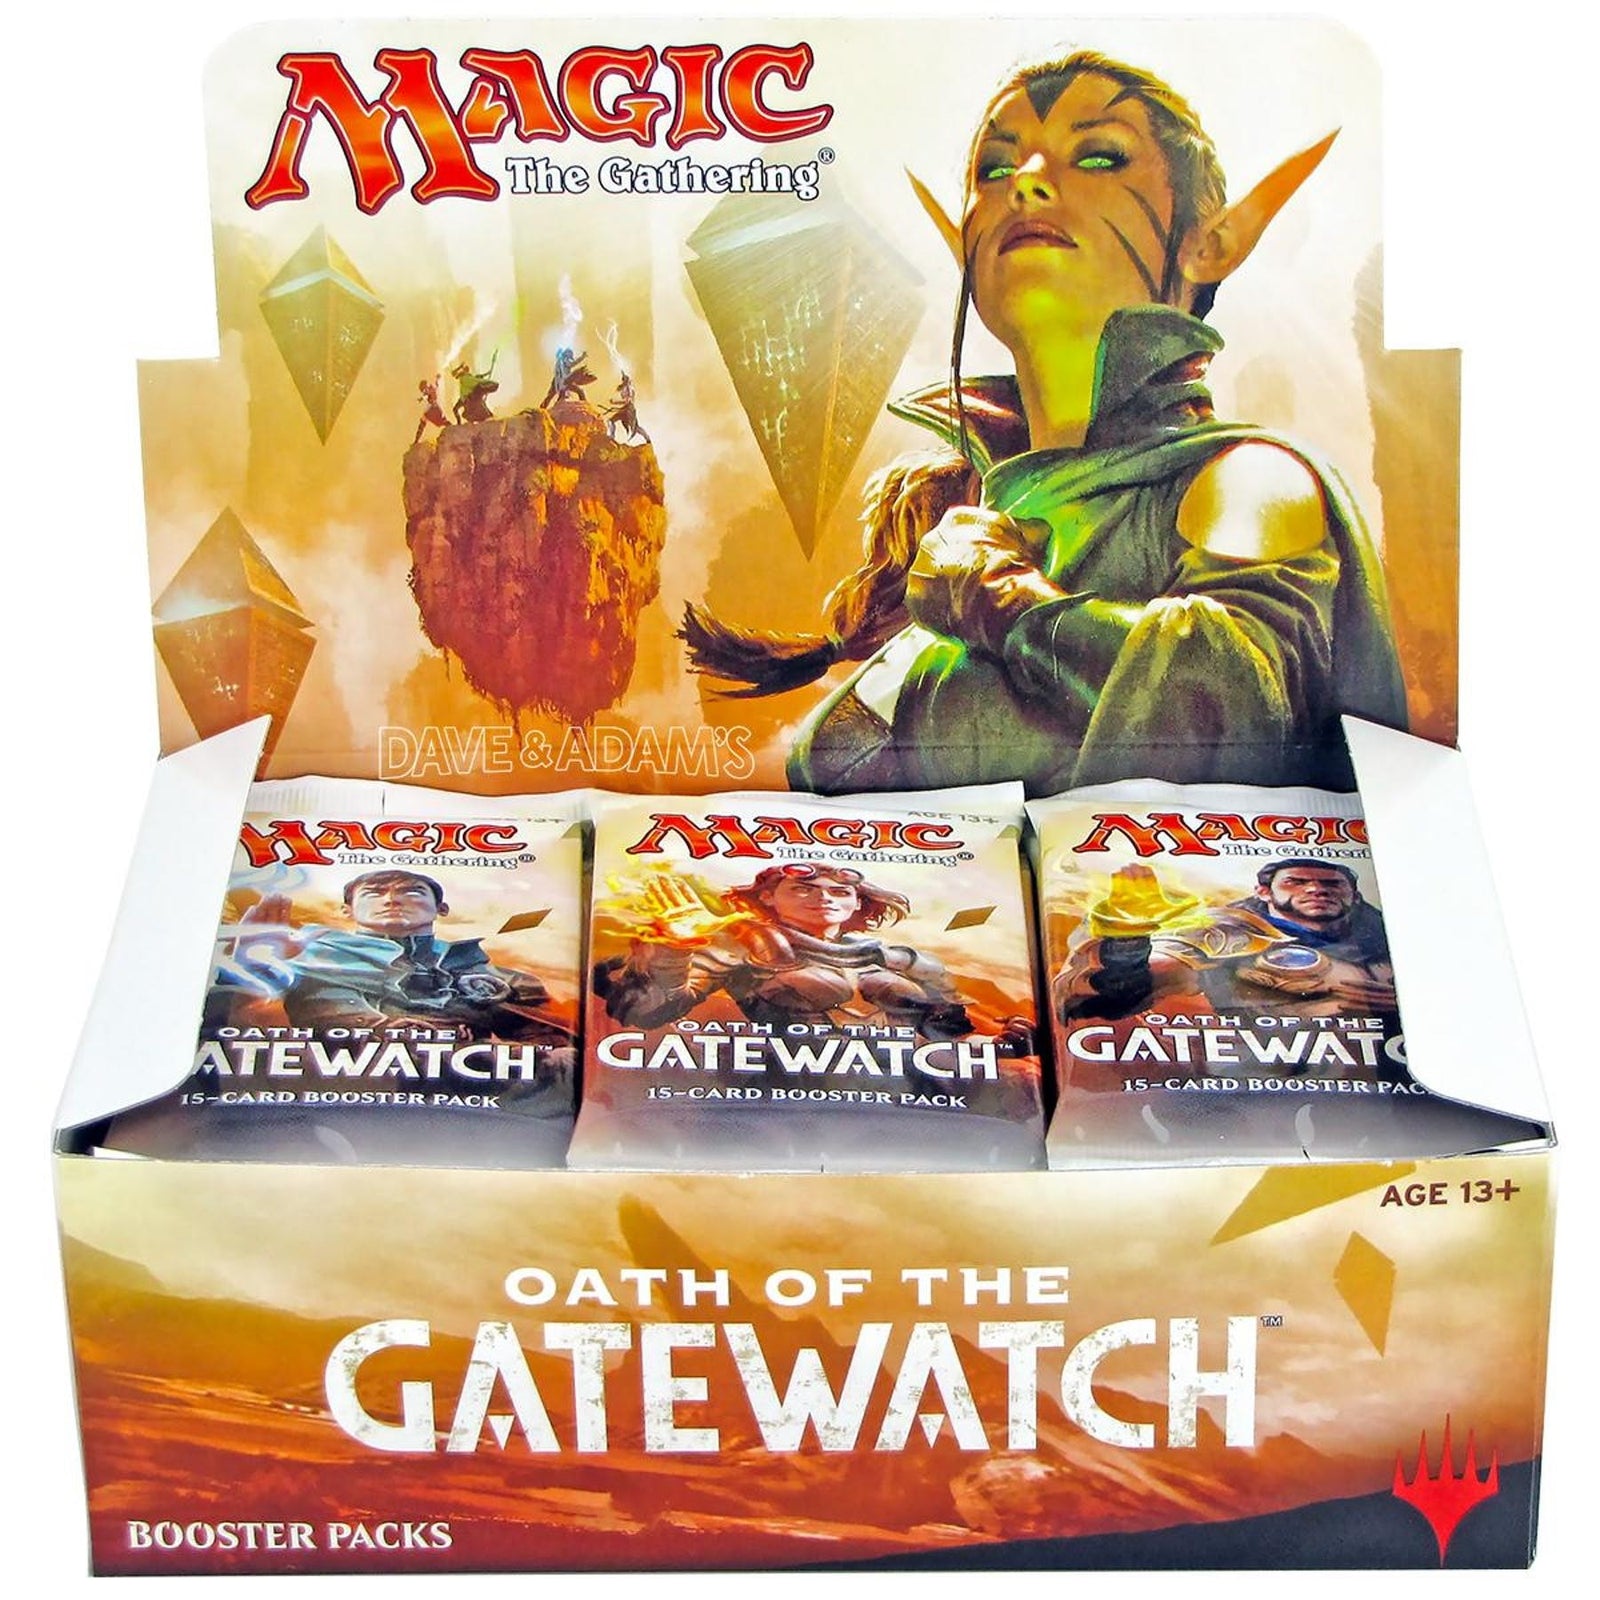 Oath of the Gatewatch Sealed Product